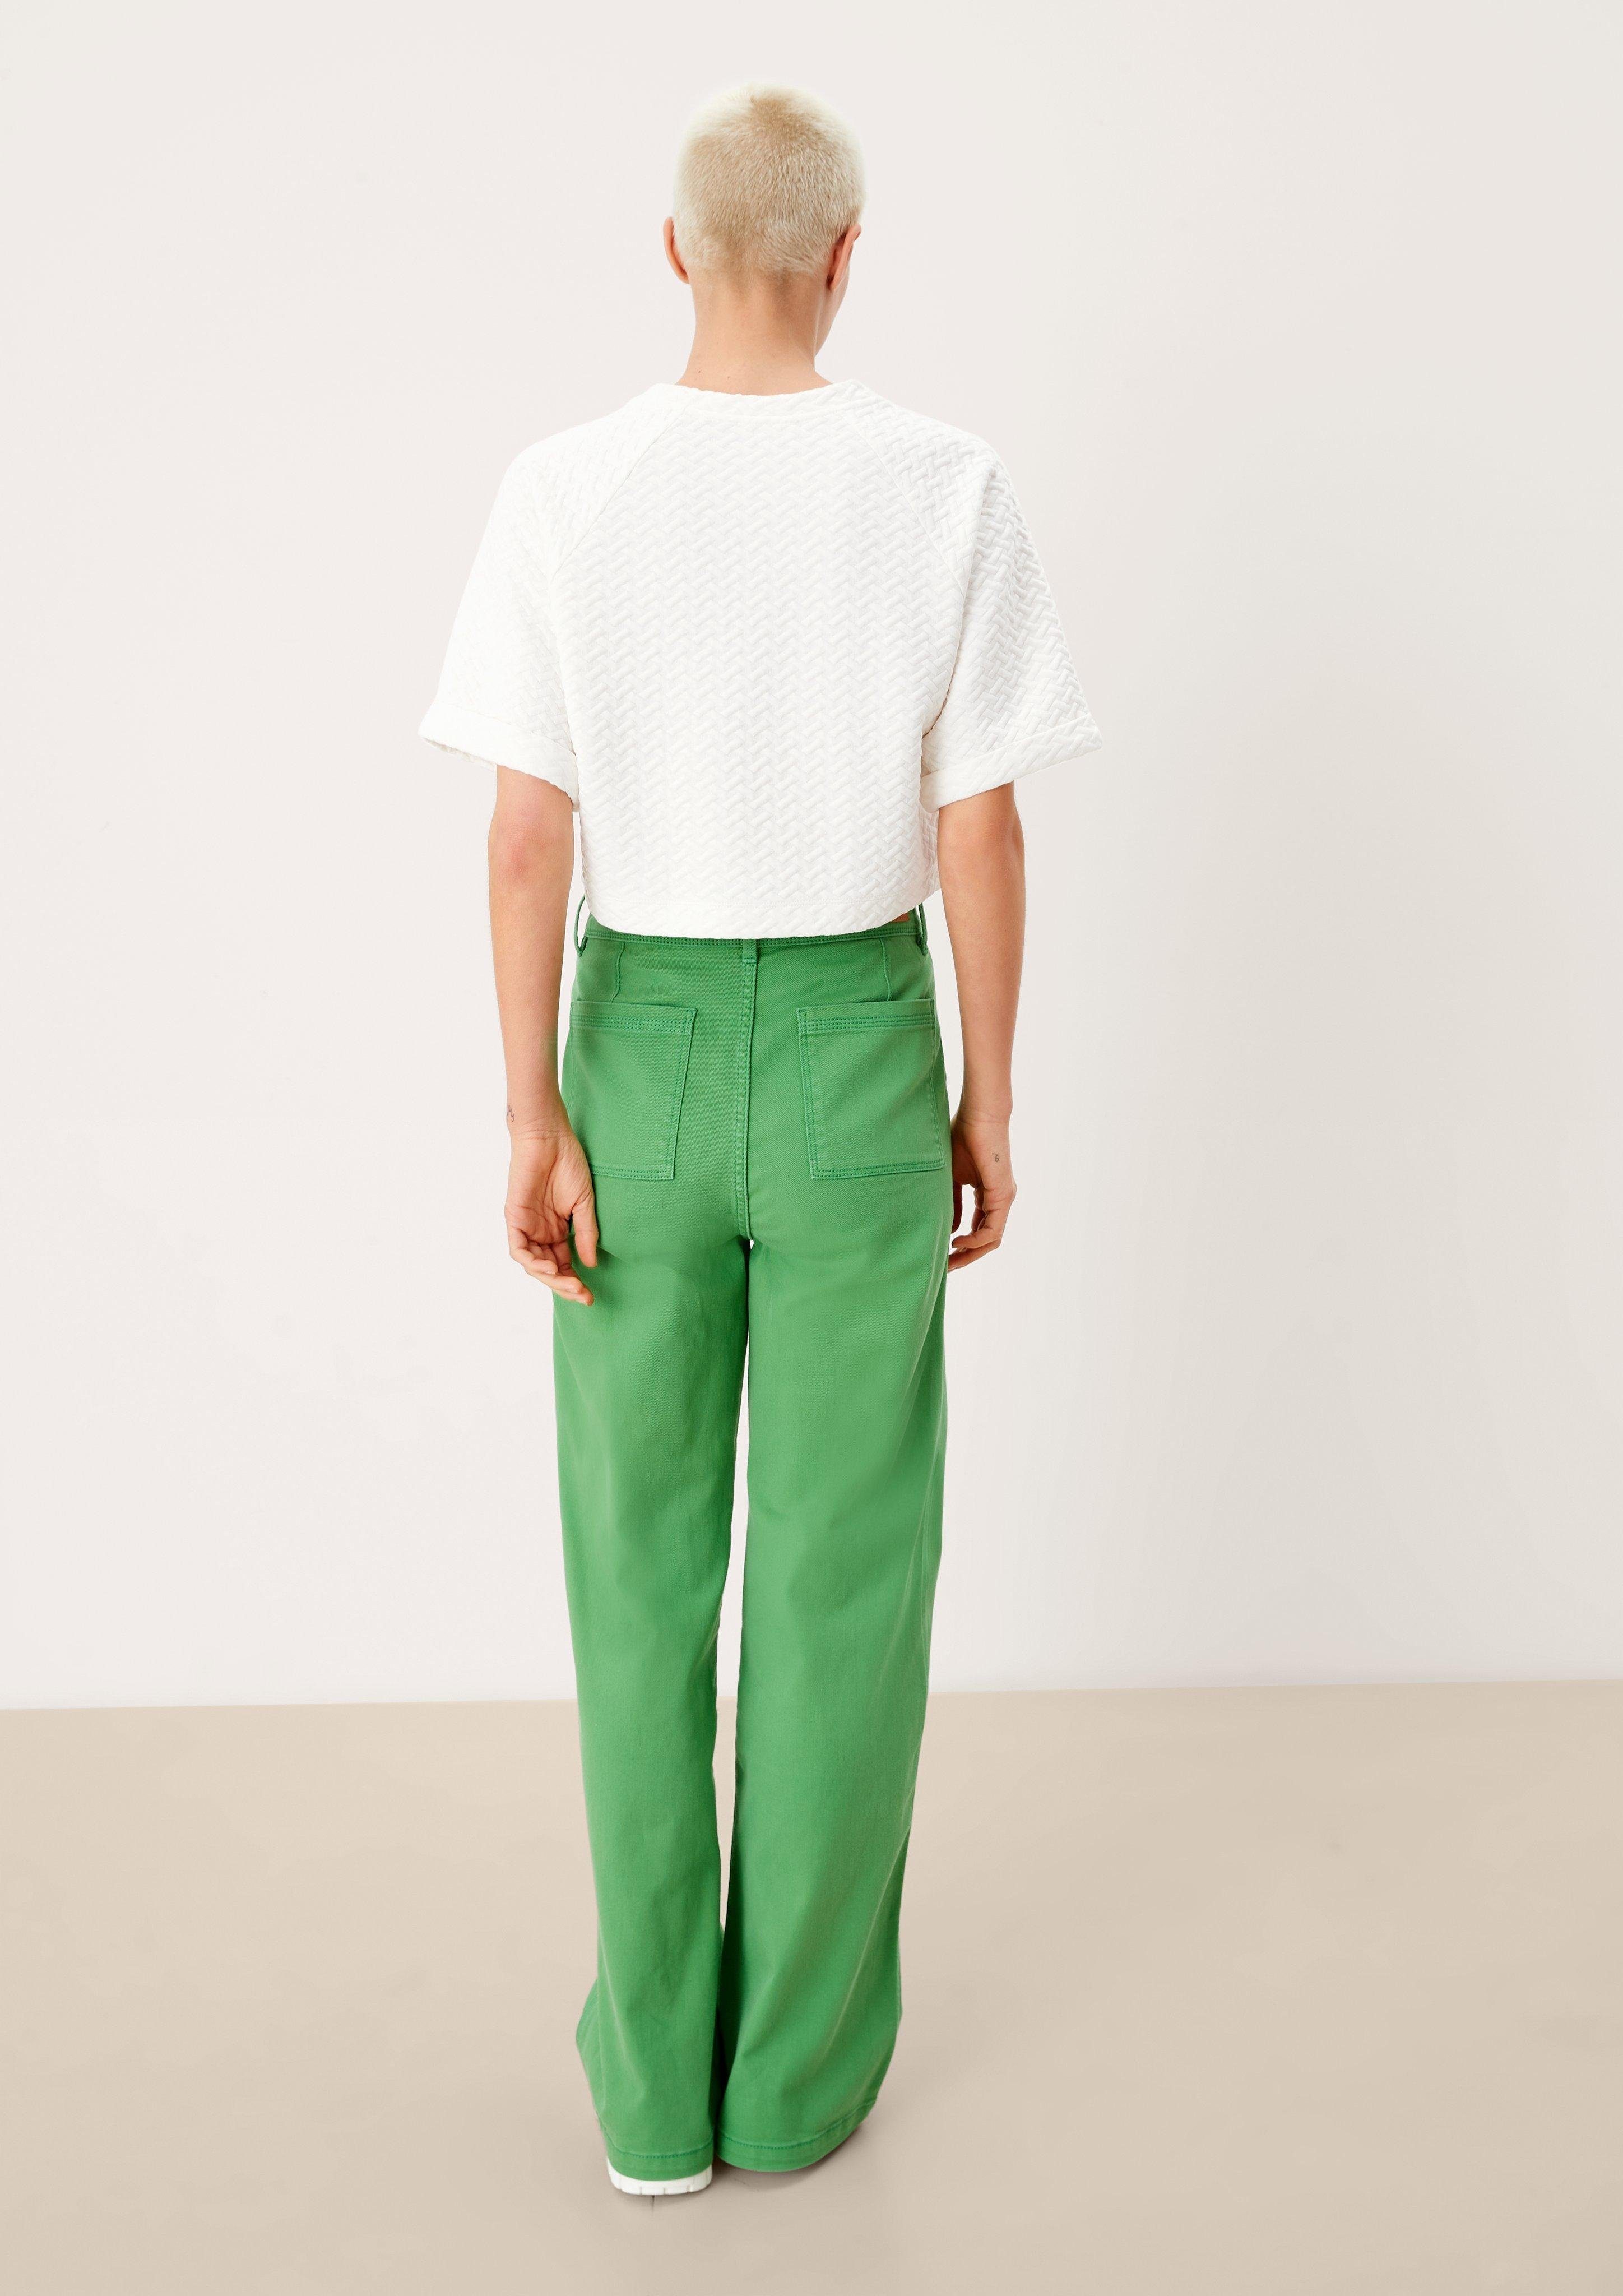 im Cropped-Style s.Oliver off-white Kurzarmshirt Shirt